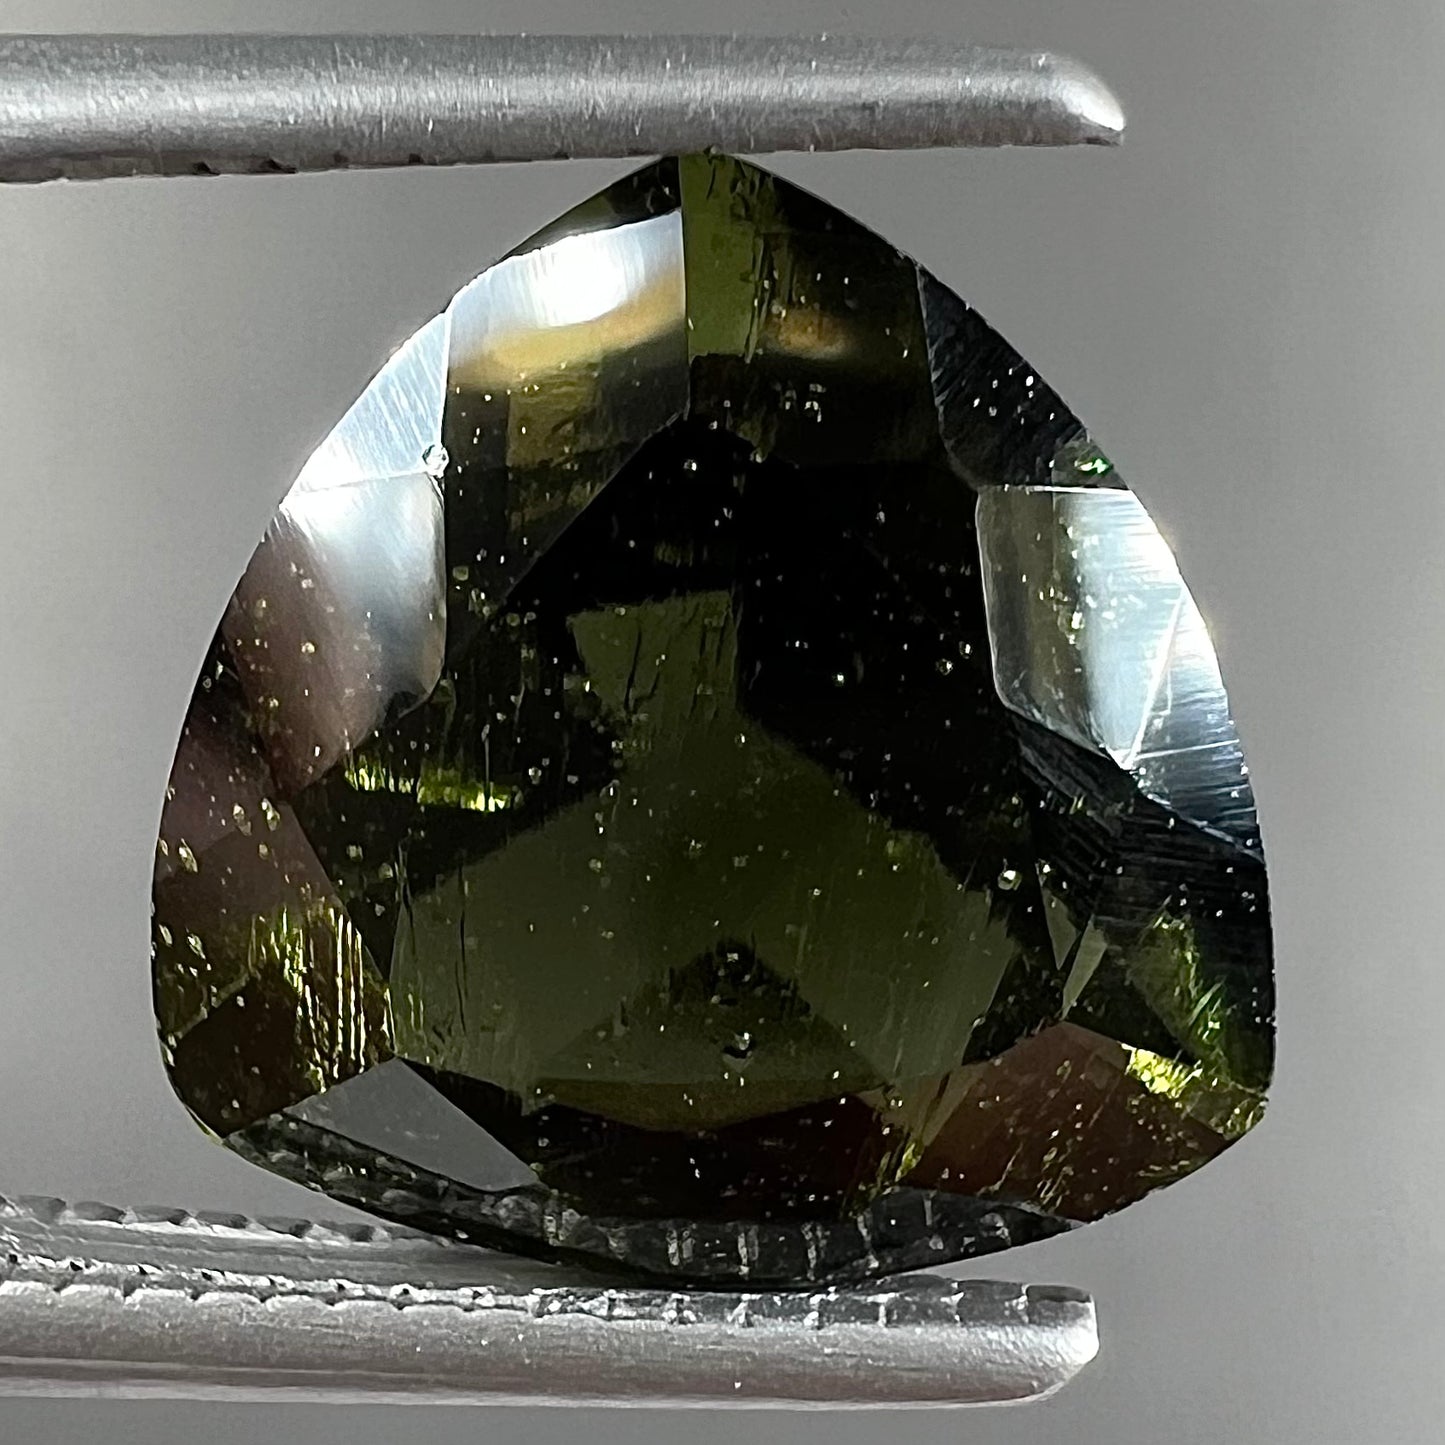 A faceted trillion cut natural moldavite gemstone that weighs 2.92 carats.  The stone is dark green color.